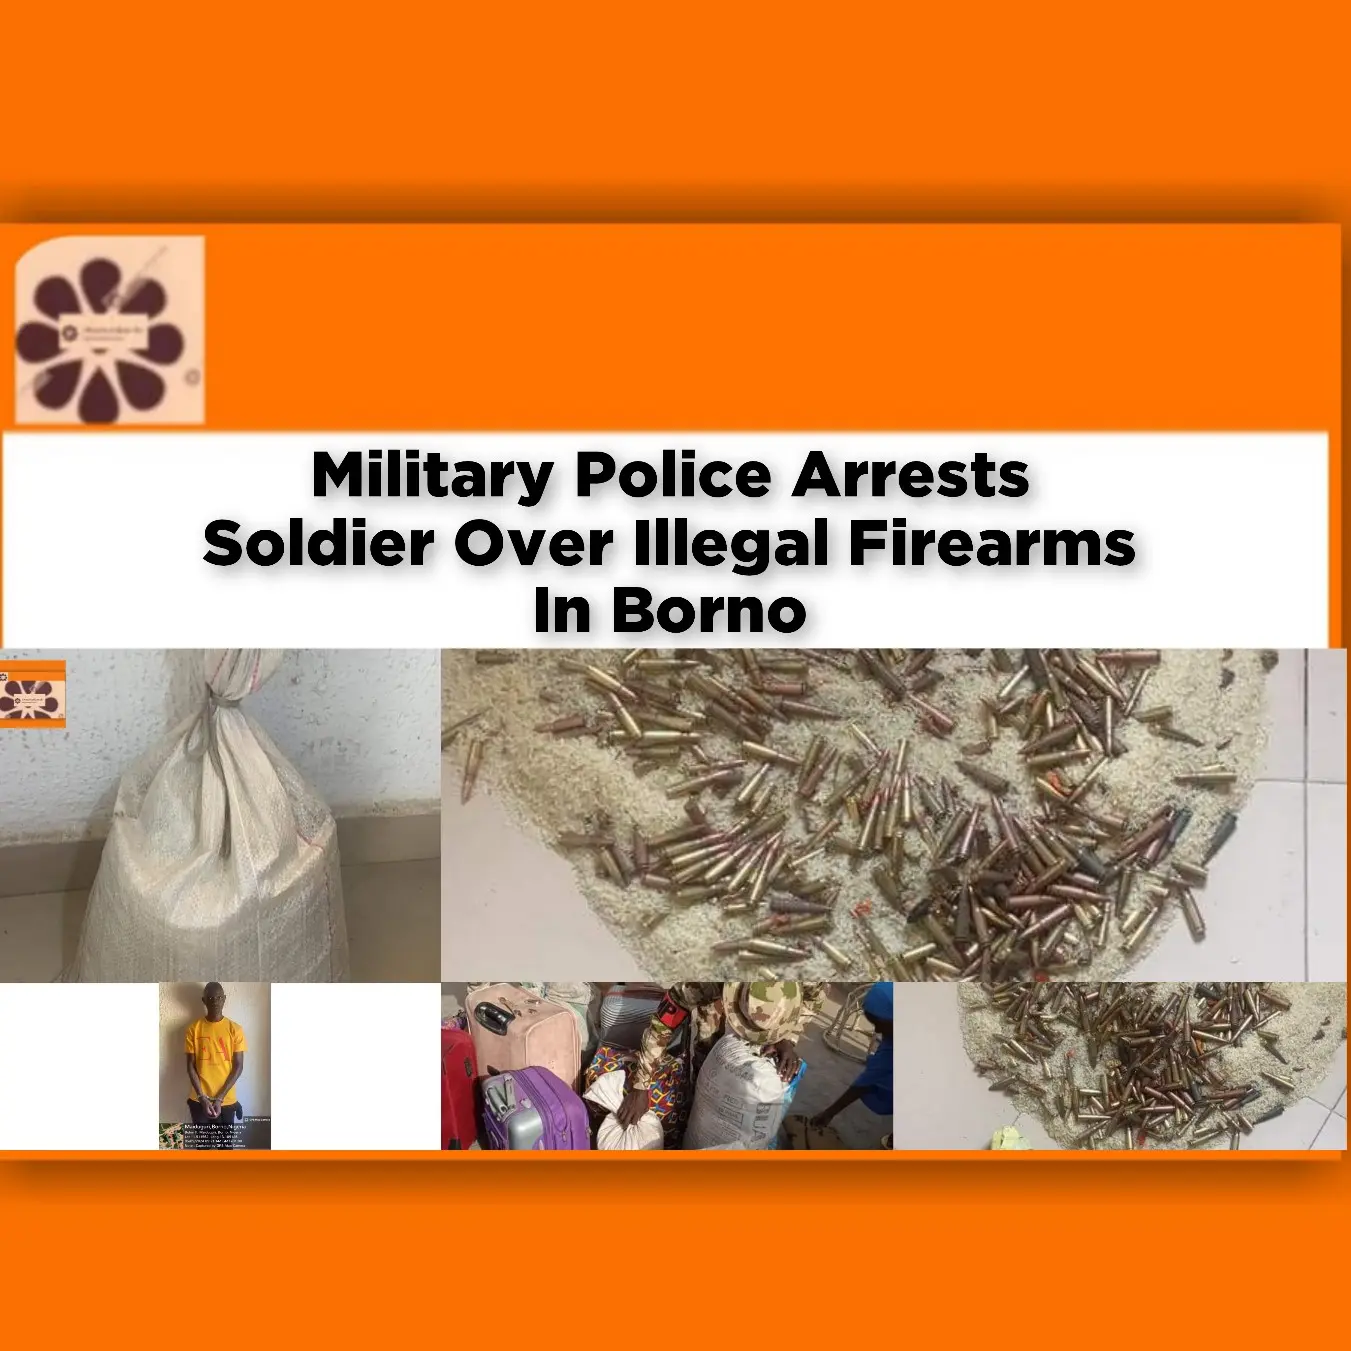 Military Police Arrests Soldier Over Illegal Firearms In Borno ~ OsazuwaAkonedo Health